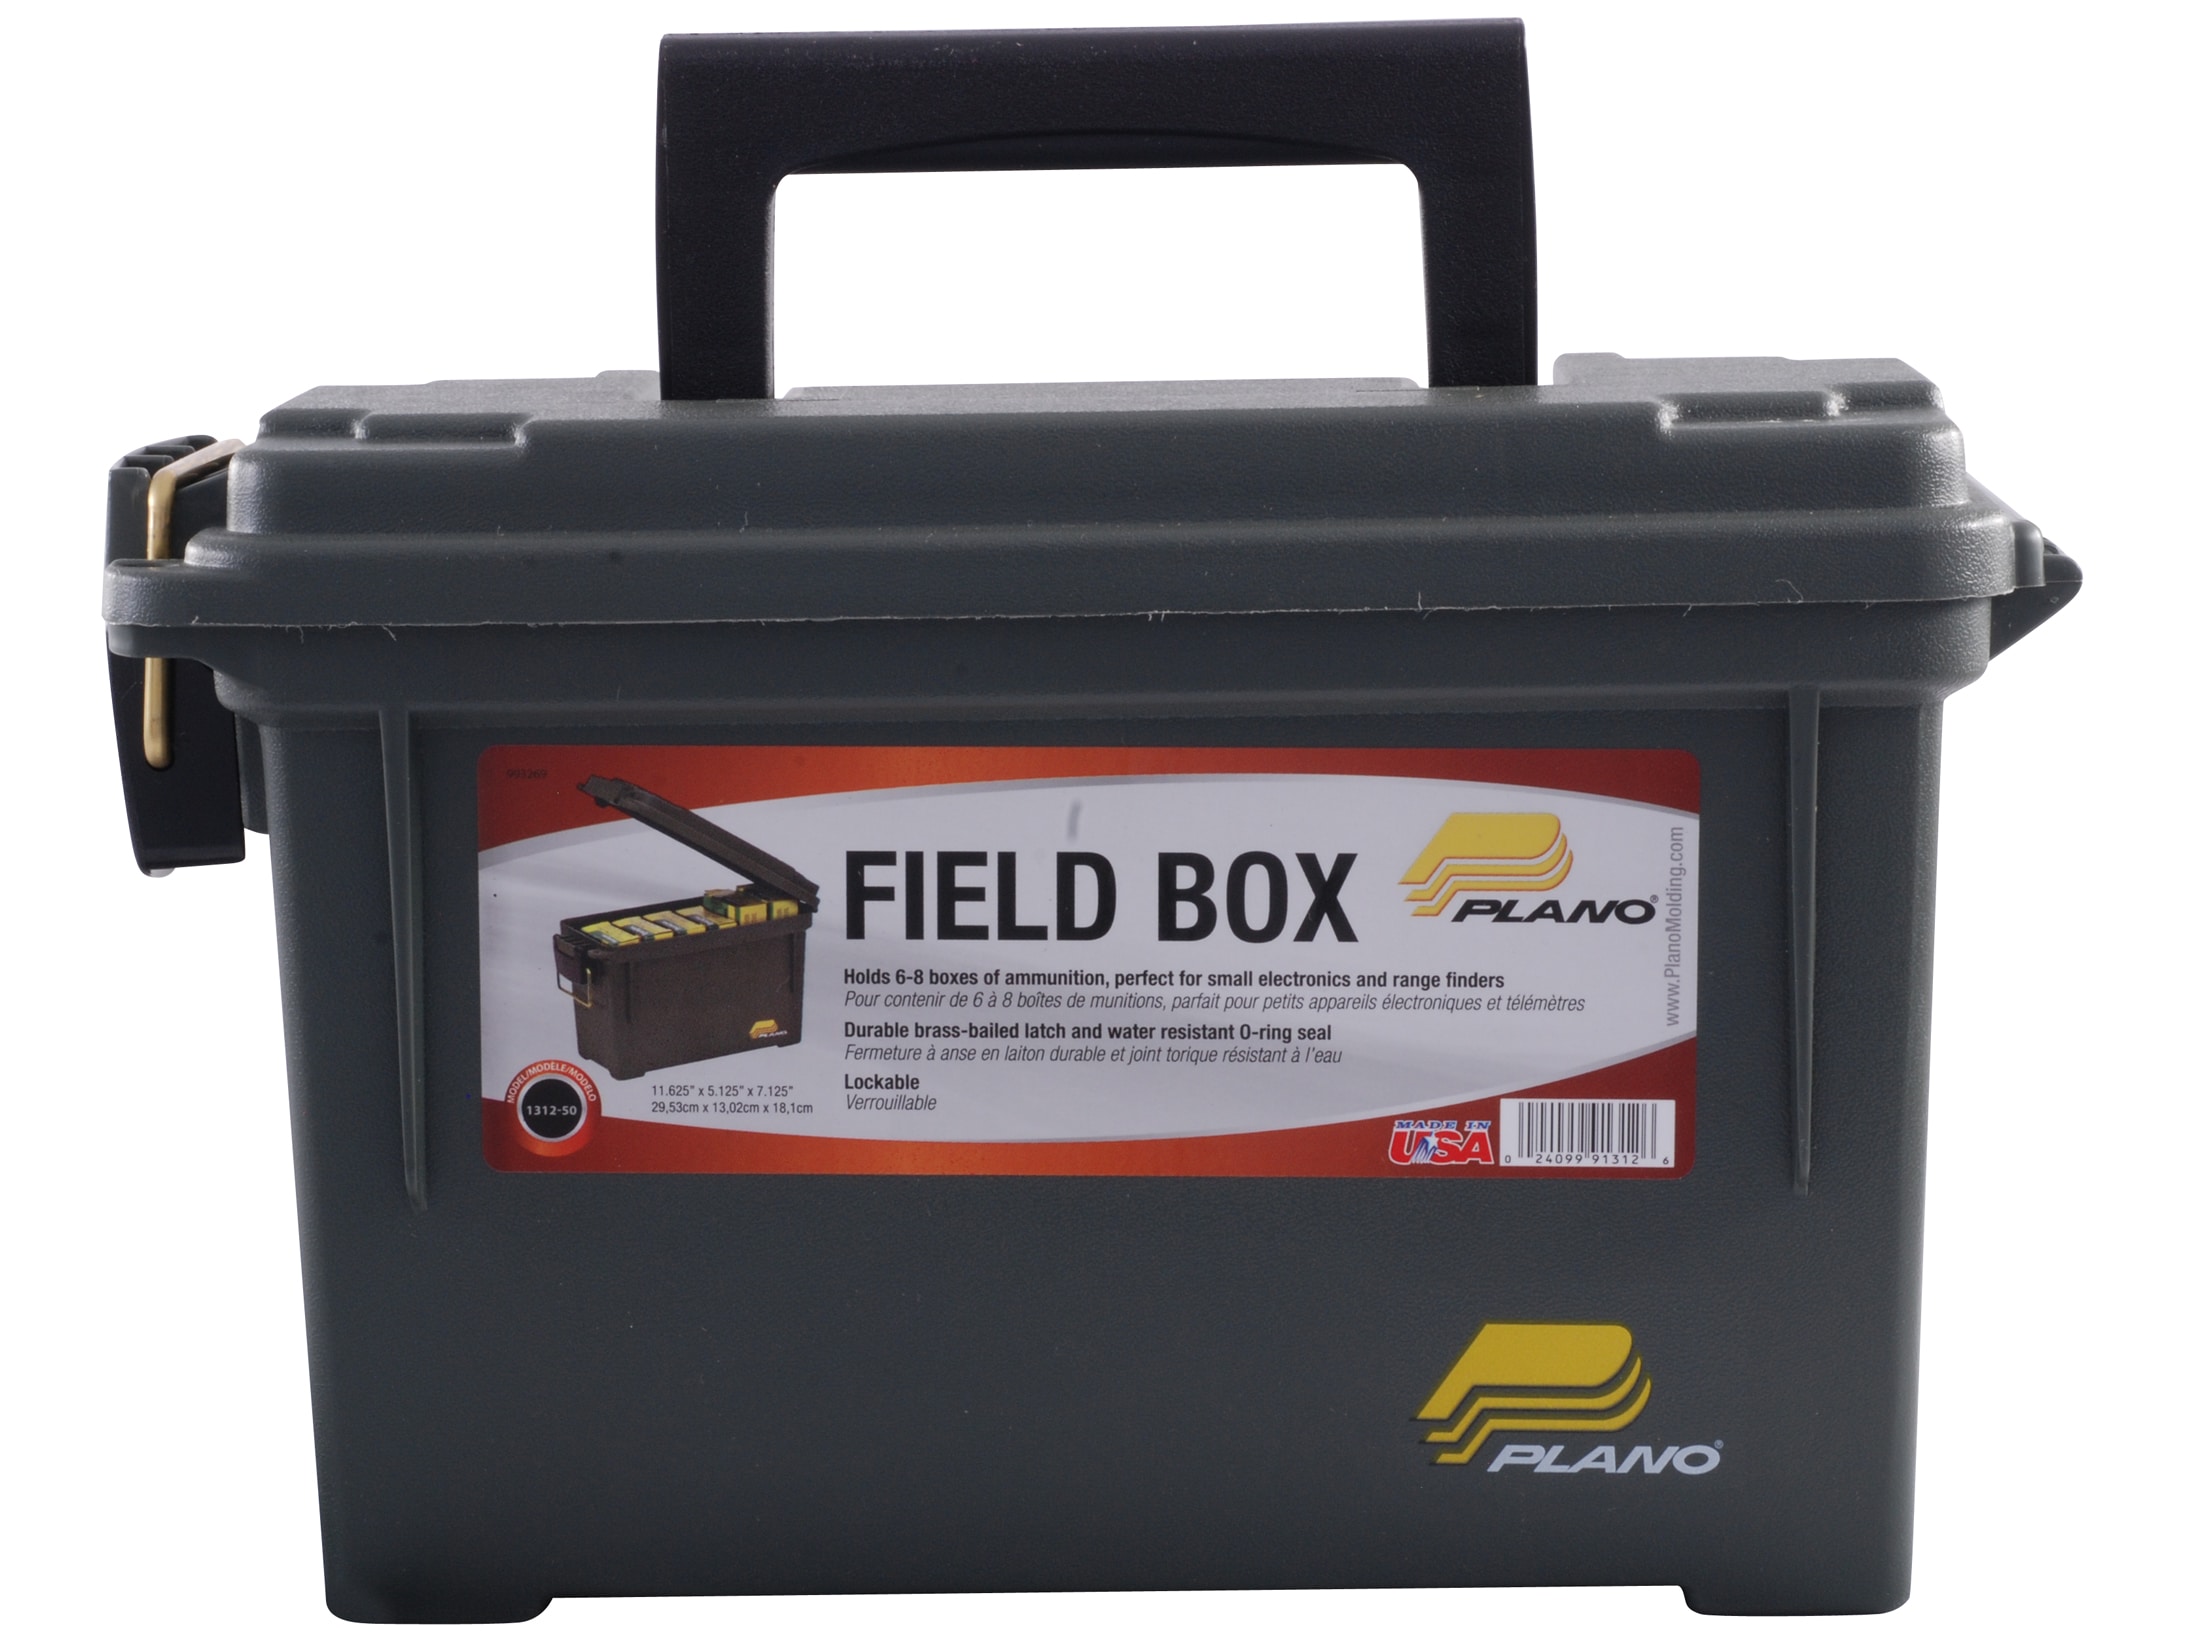 Plano Field/Ammo Box  Heavy-Duty Storage Case for Hunting and Shooting  Ammunition Small